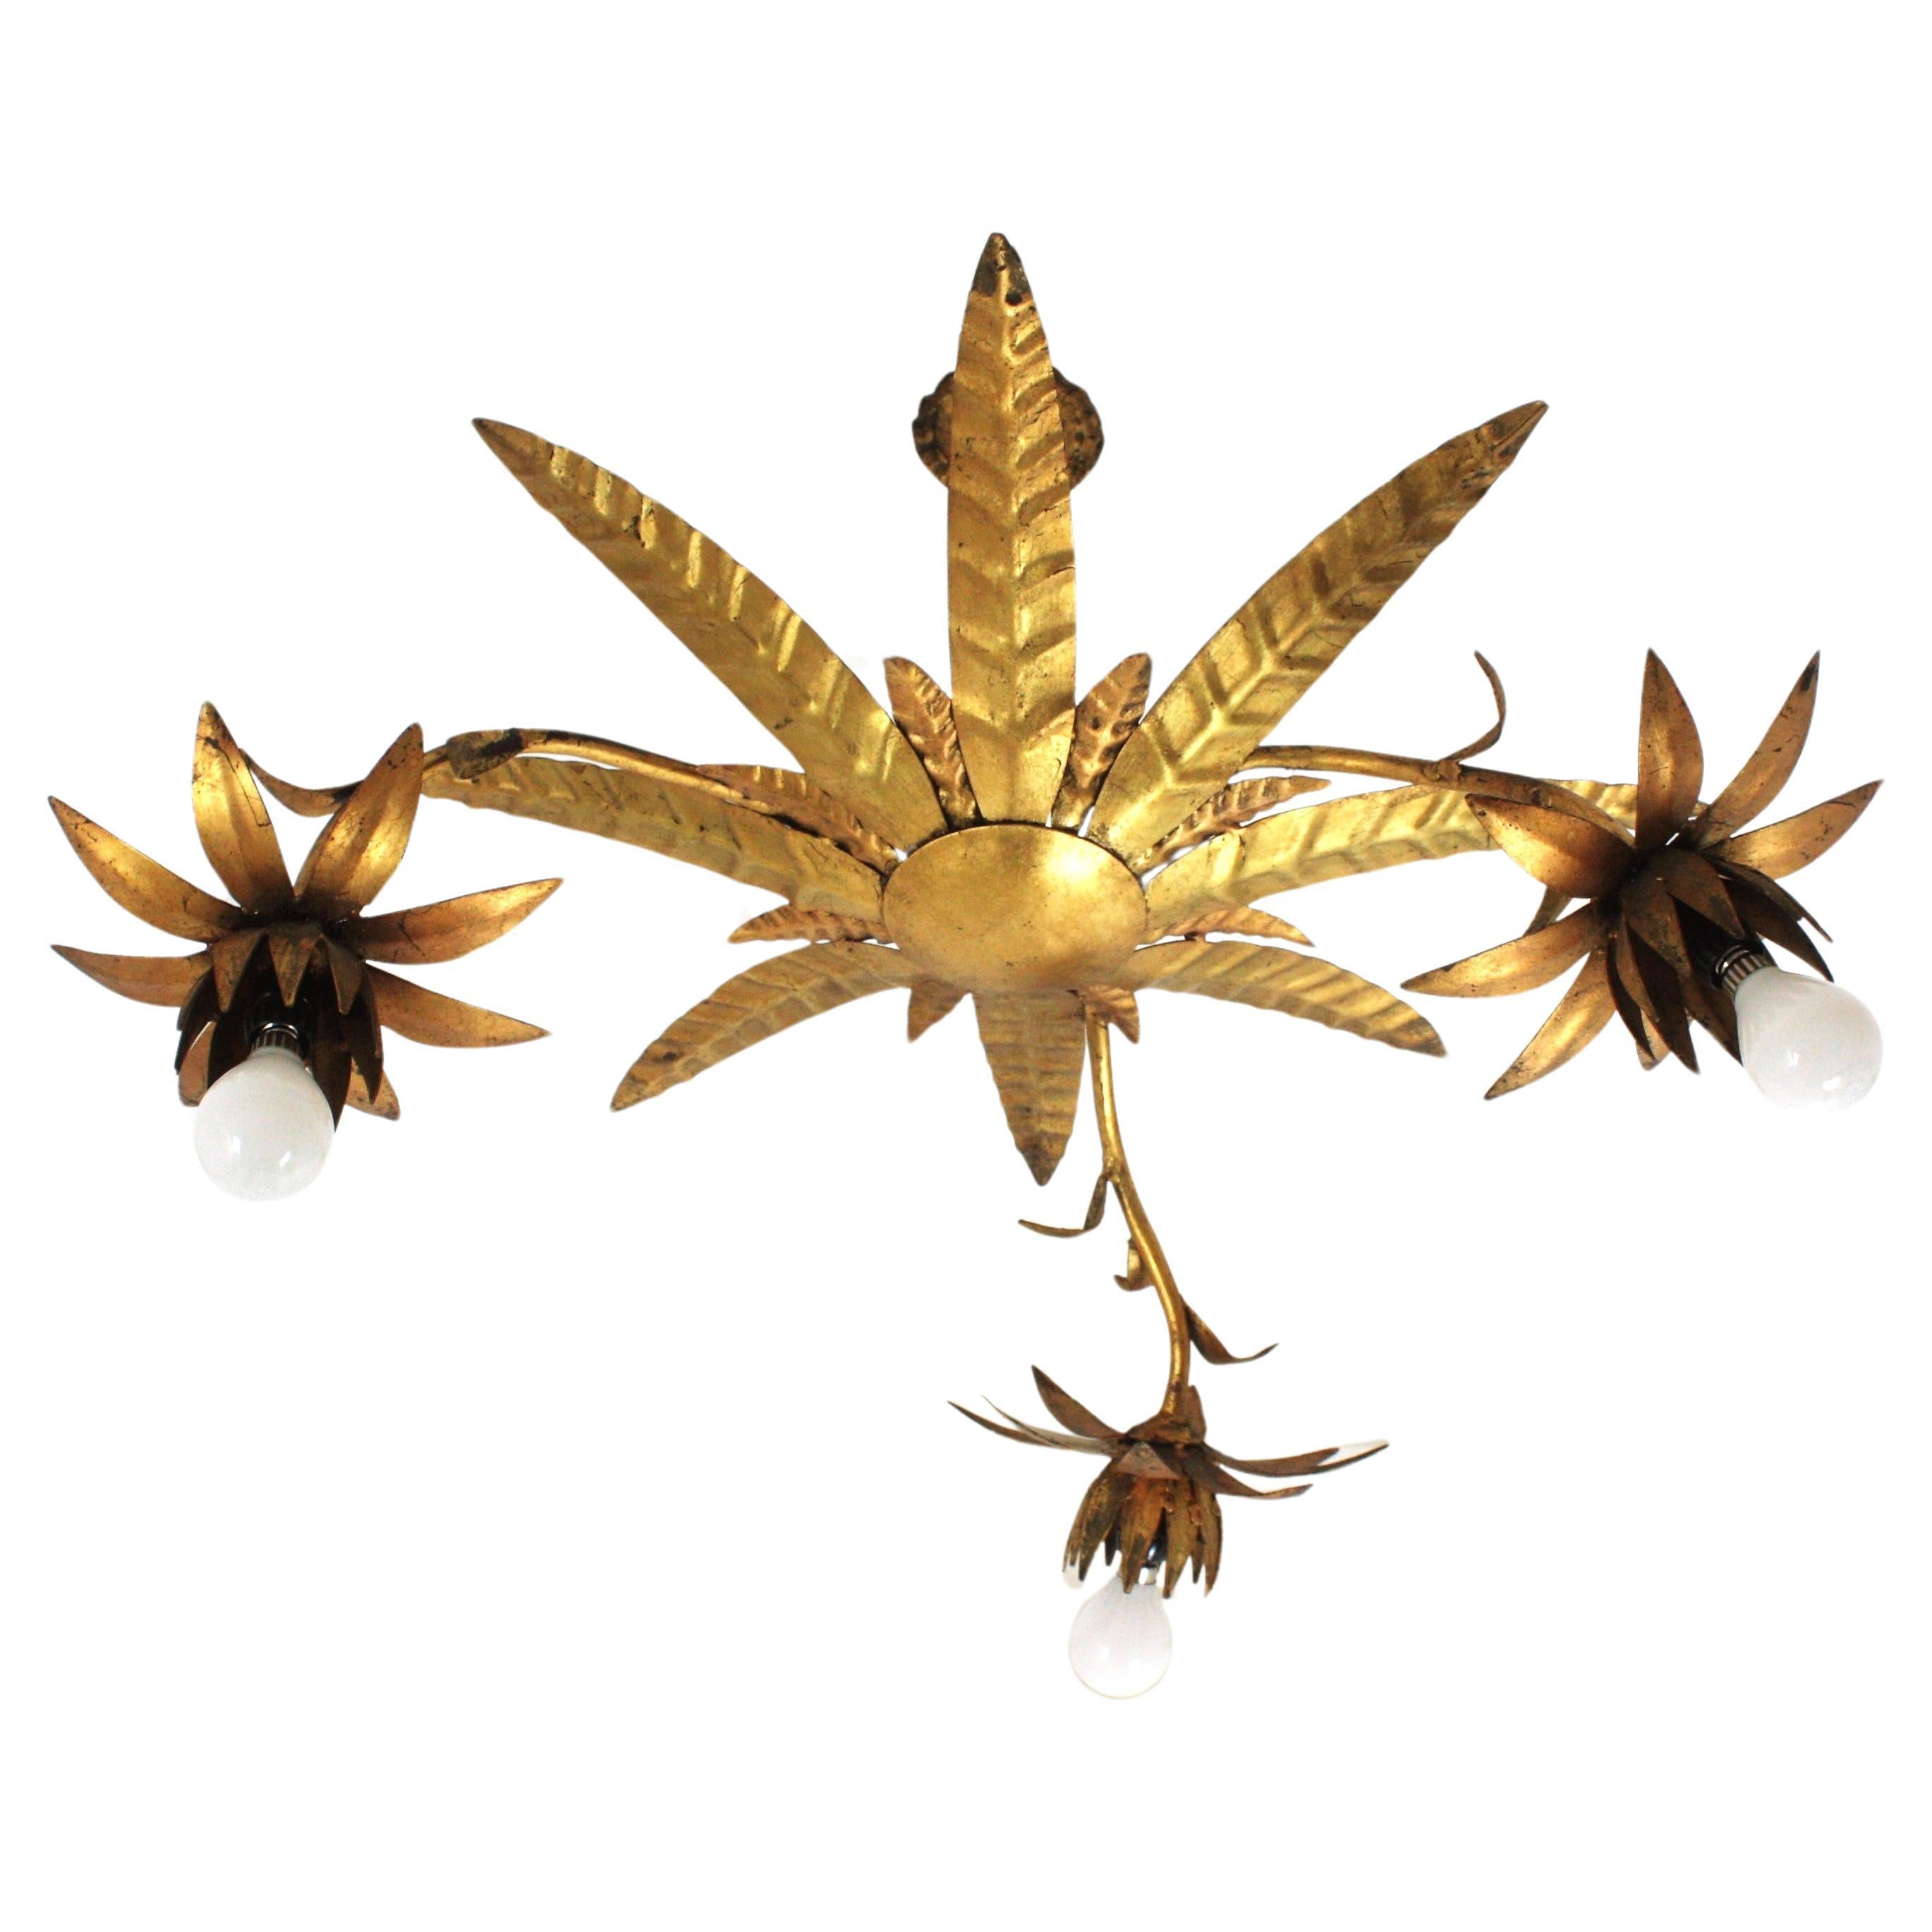 Outstanding sunburst foliage chandelier with three flowers, Gilt Iron. Spain, 1950s
This handcrafted ceiling lamp features a double layered leafed sunburst light fixture at the central part surrounded by three branches holding one flower each for 1